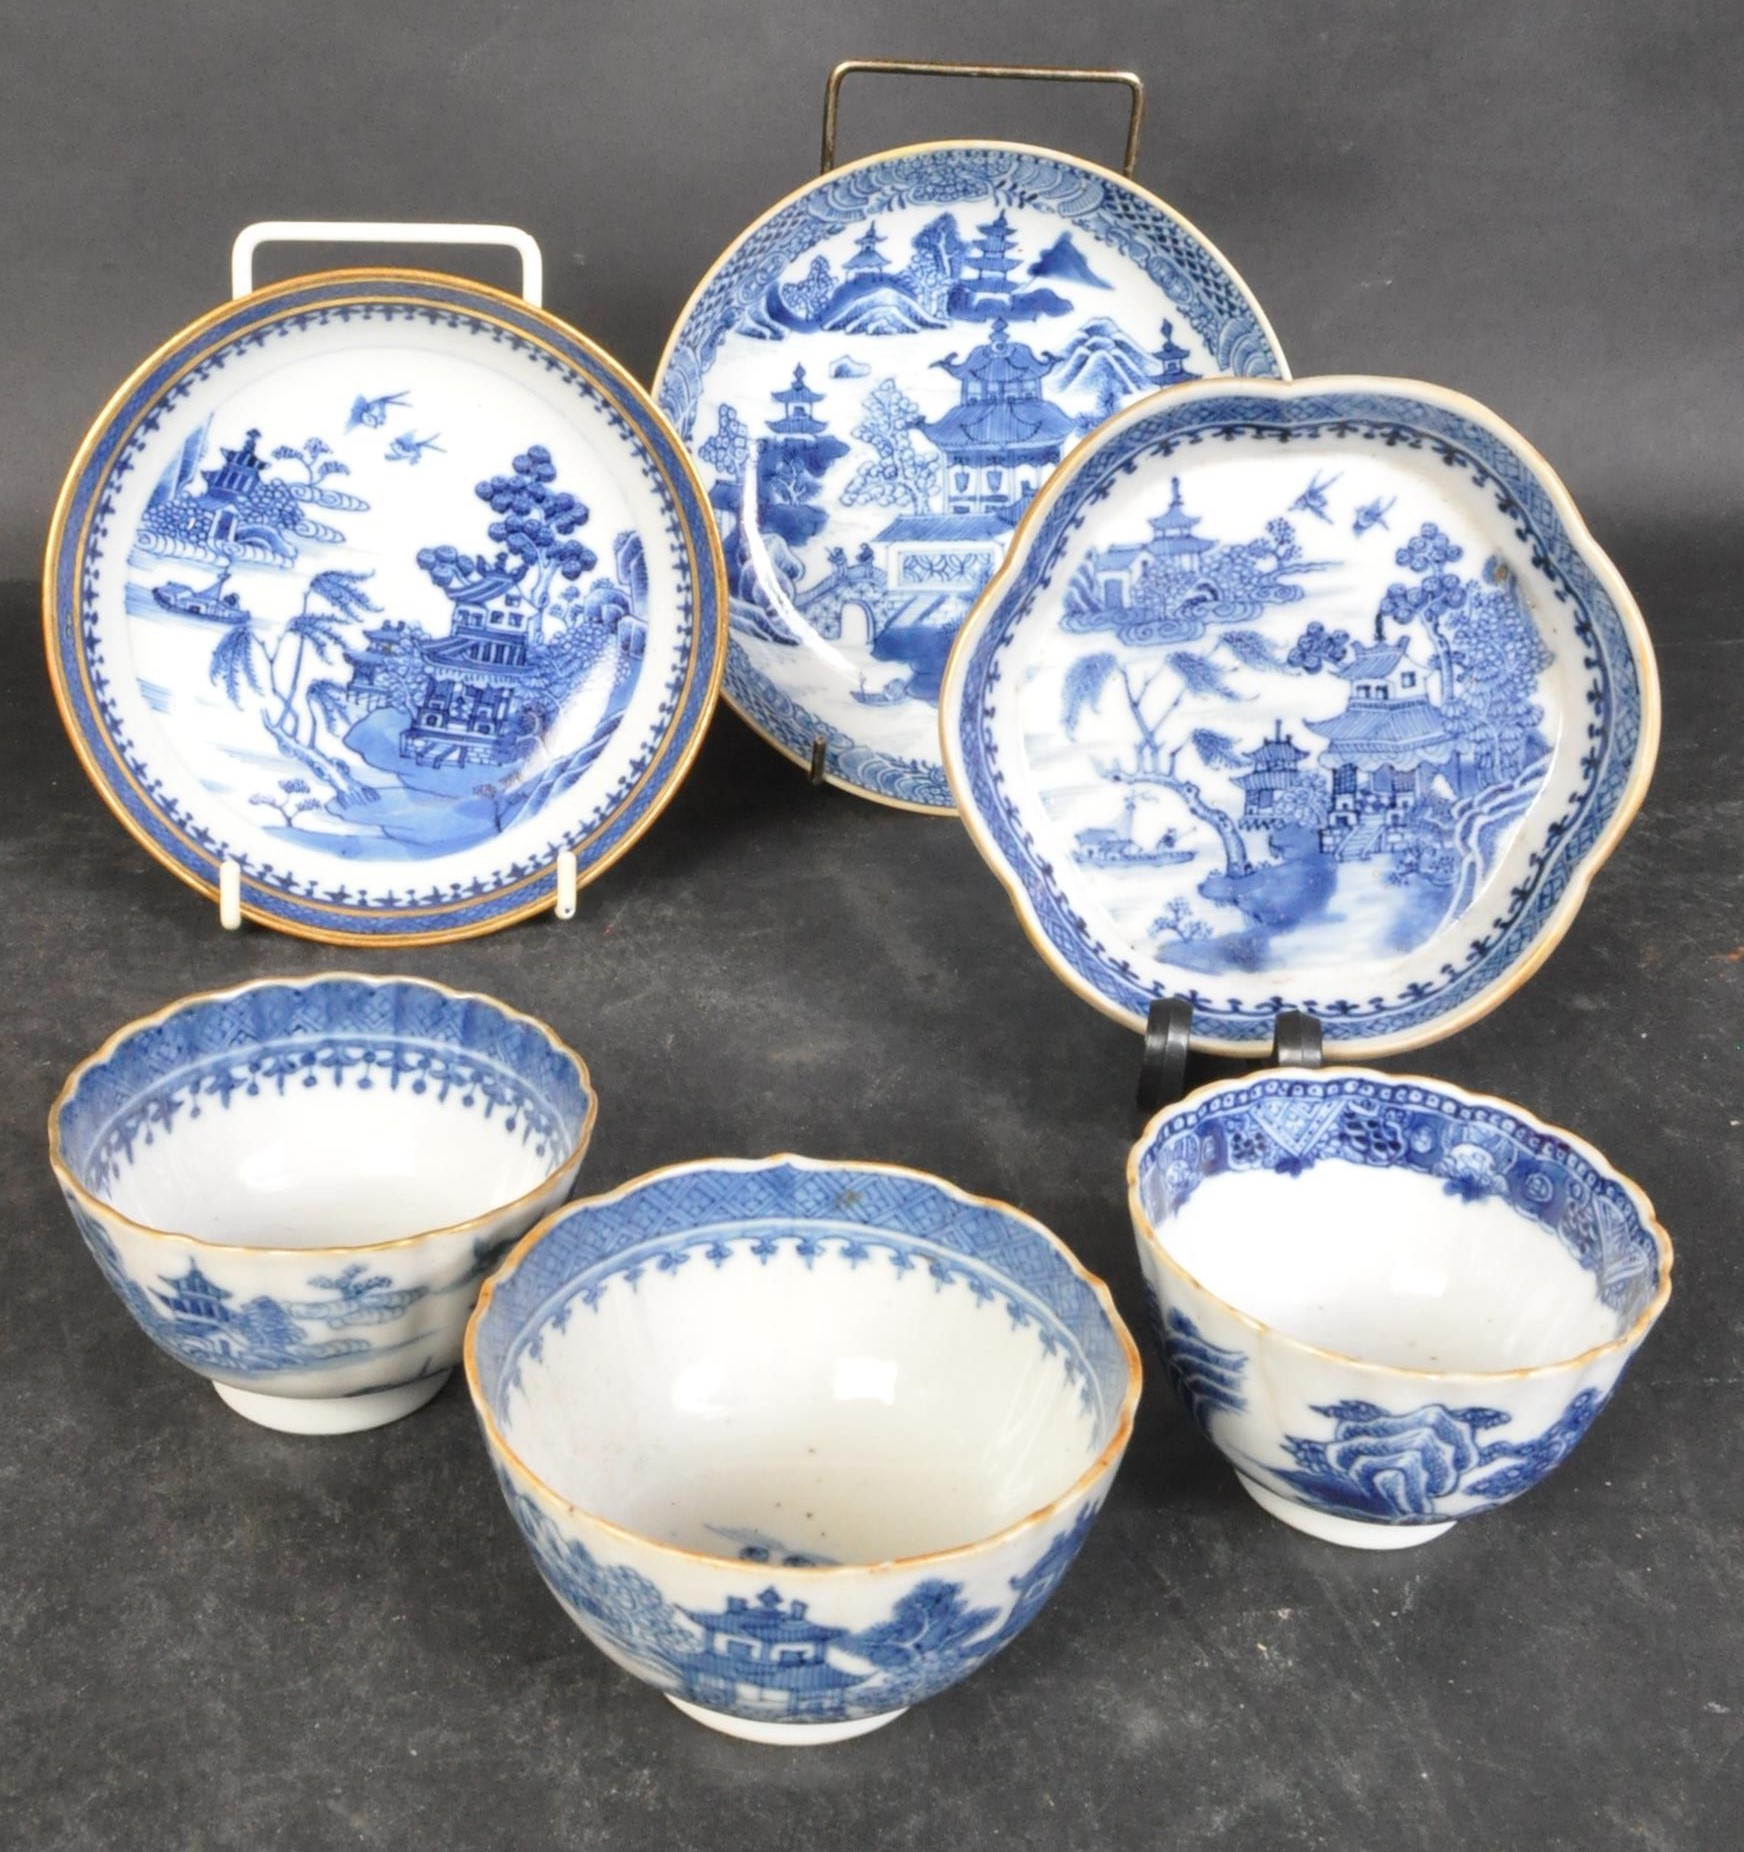 ASSORTMENT OF 18TH CENTURY CHINESE QIANLONG PORCELAIN ITEMS